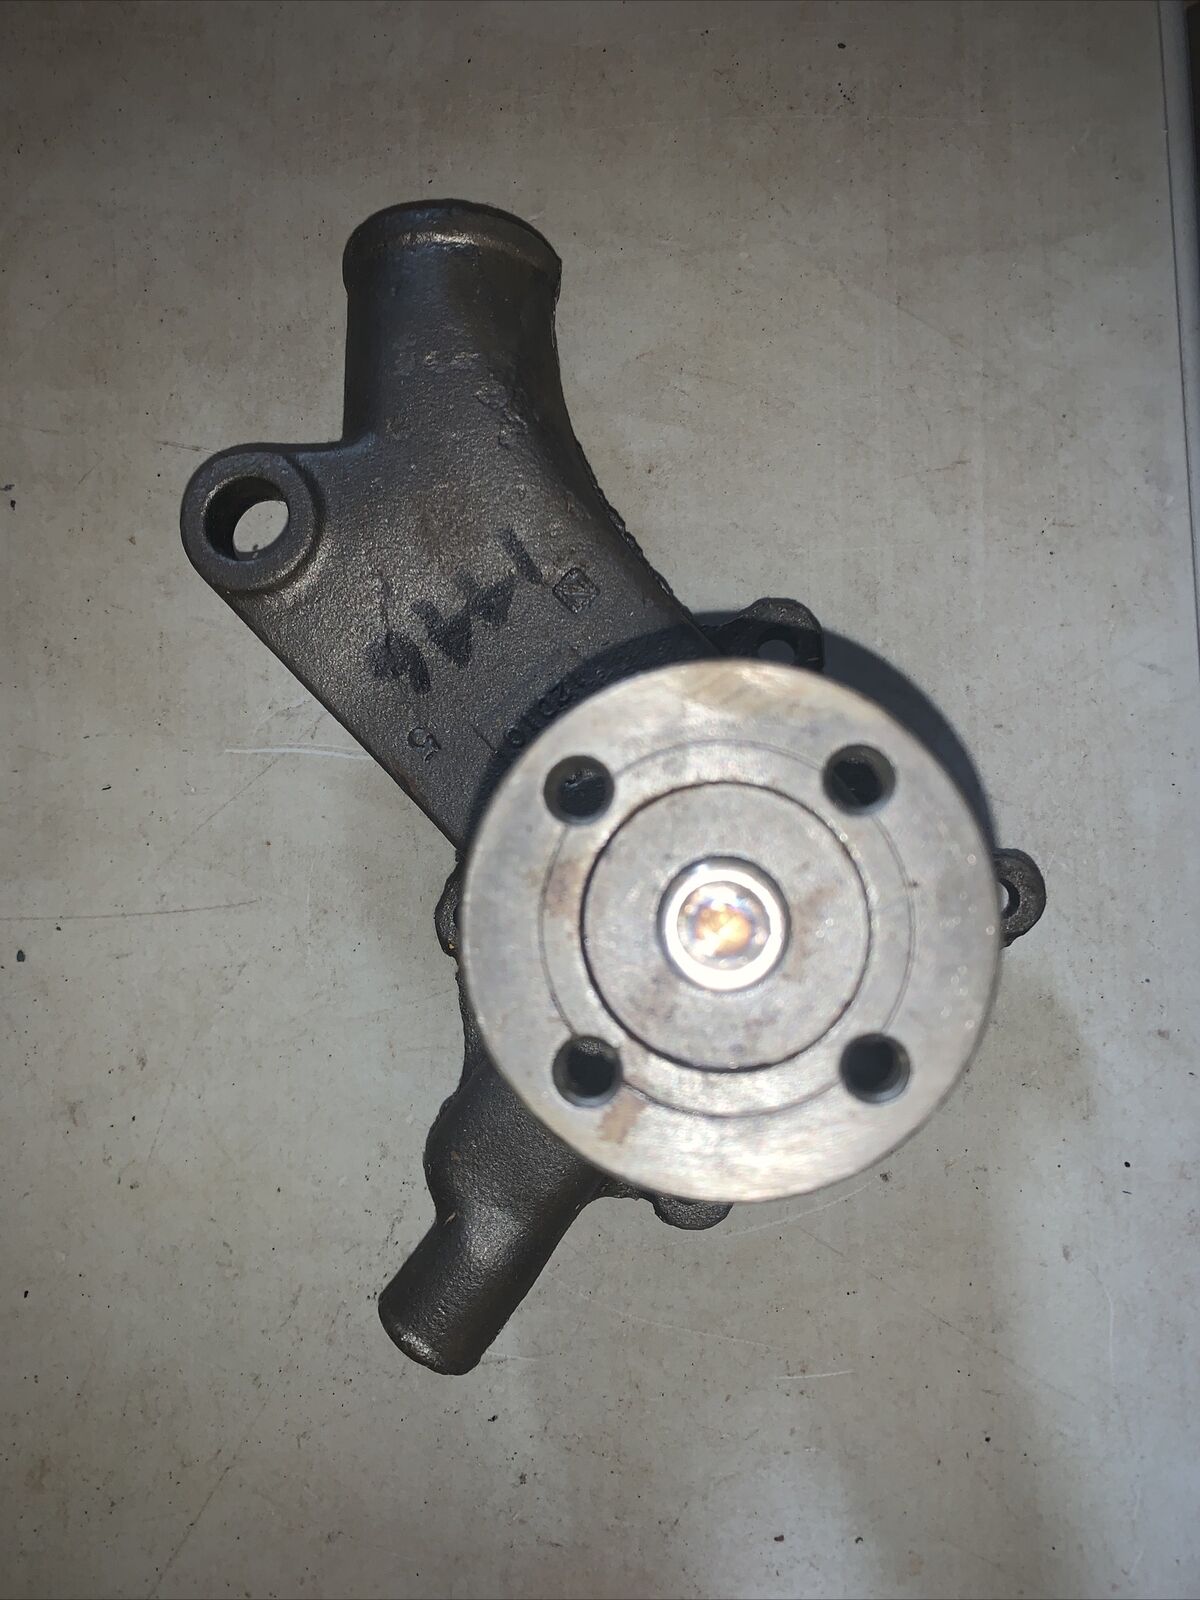 New old stock water pump 1968 to 71 AMC hornet javelin gremlin number 3190999